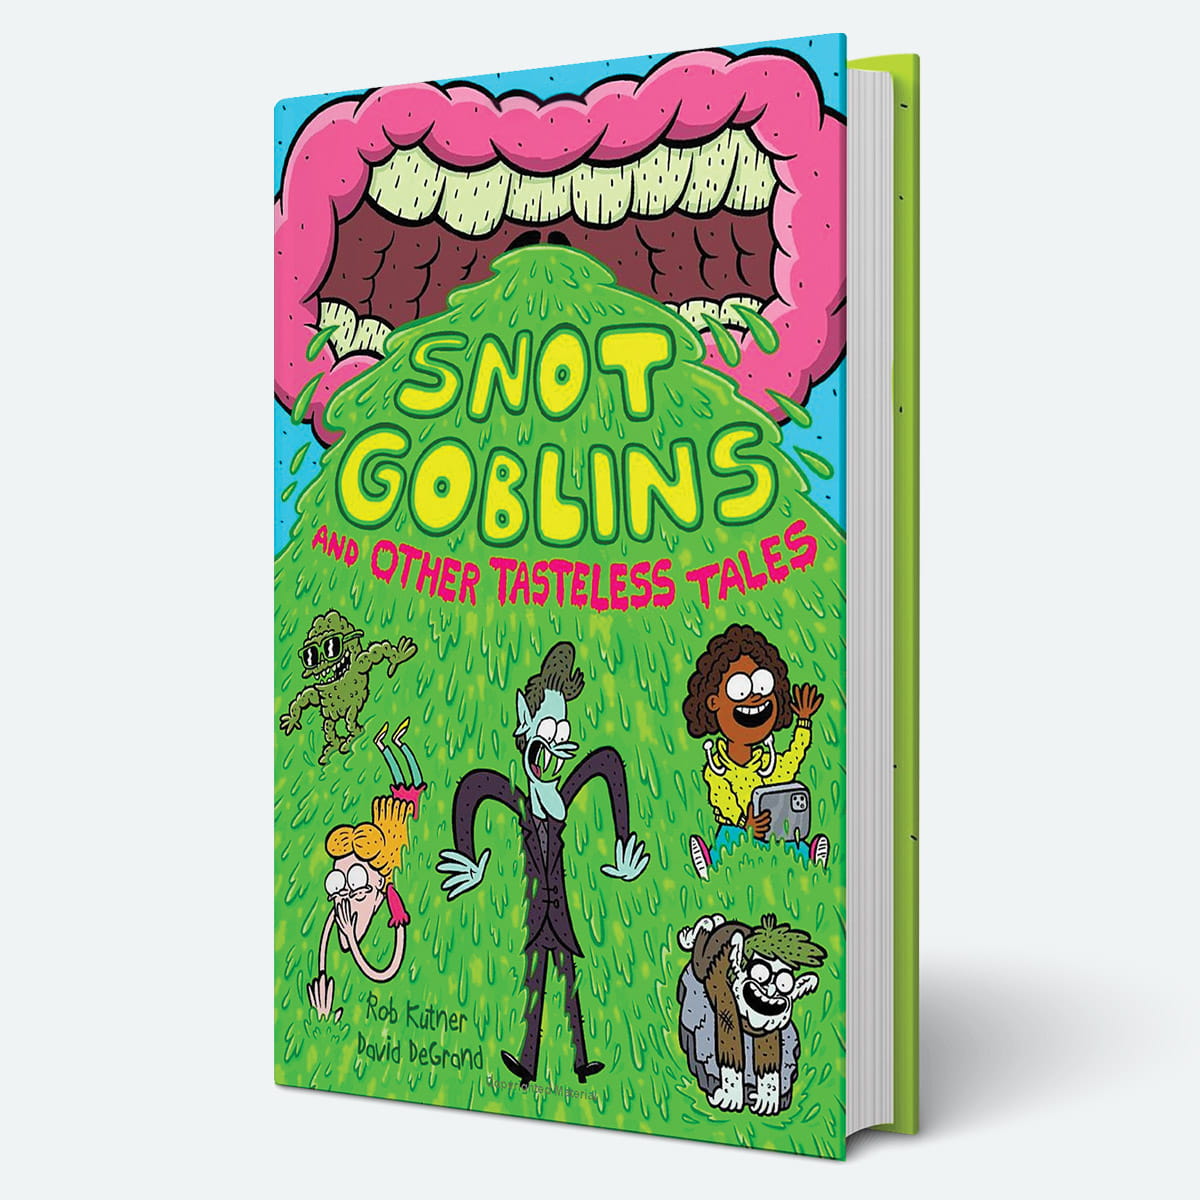 Snot Goblins book cover